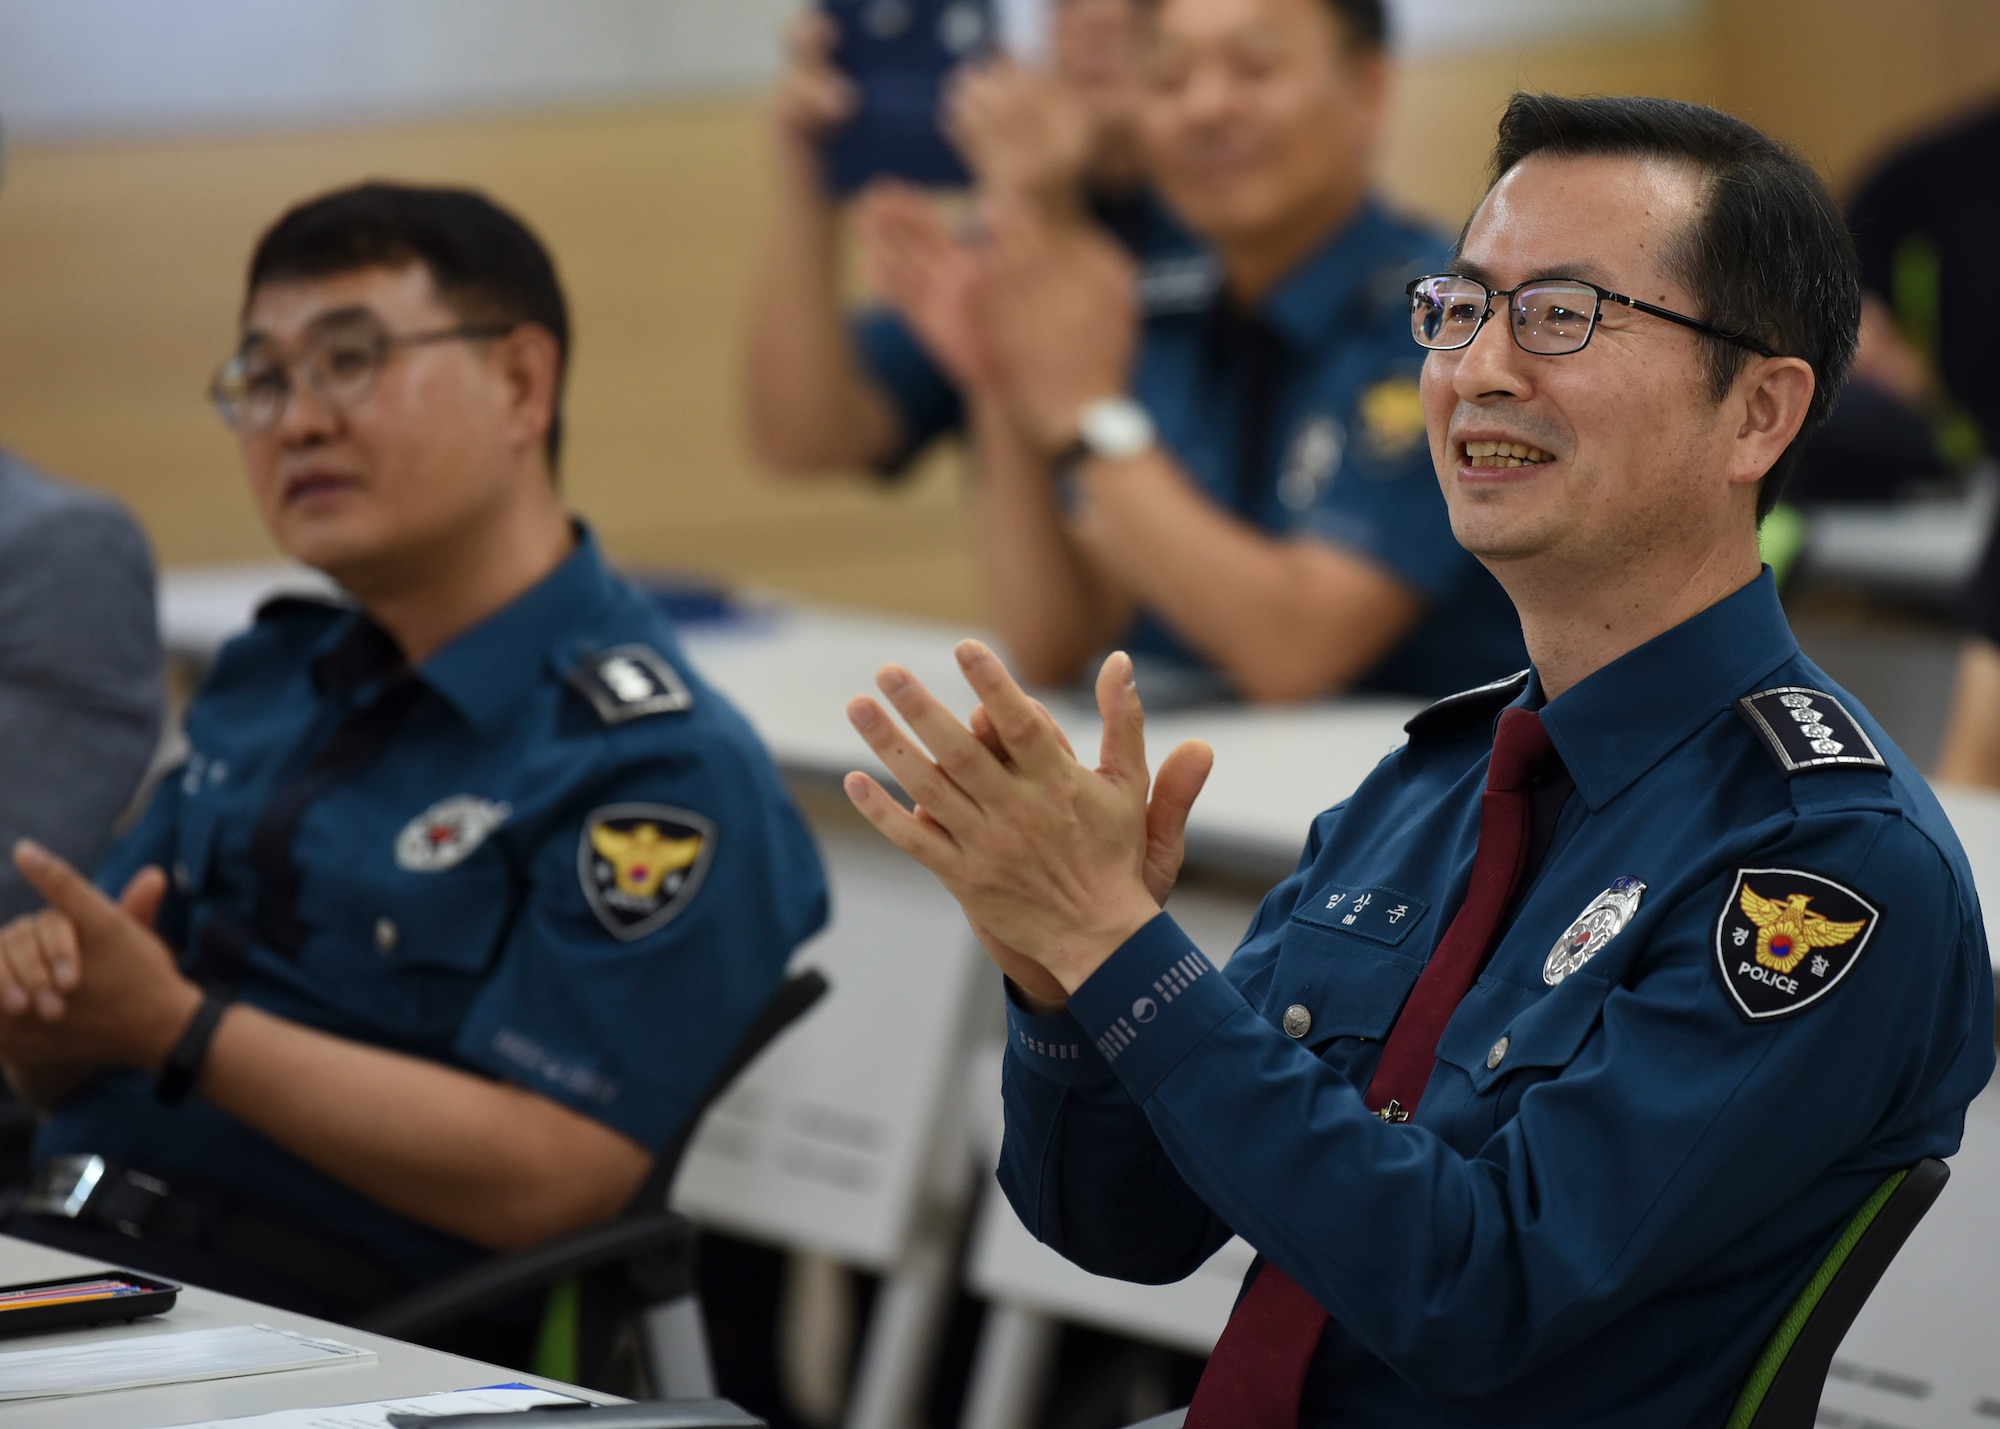 Sang-joon Lim, Gunsan Korean National Police chief, claps along to the U.S. Air Force Band of the Pacific in Gunsan City, Republic of Korea, Sept. 24, 2019. The band was established over 75 years ago but did not settle in its current location of Yokota Air Base, Japan until 1988. (U.S. Air Force photo by Staff Sgt. Anthony Hetlage)